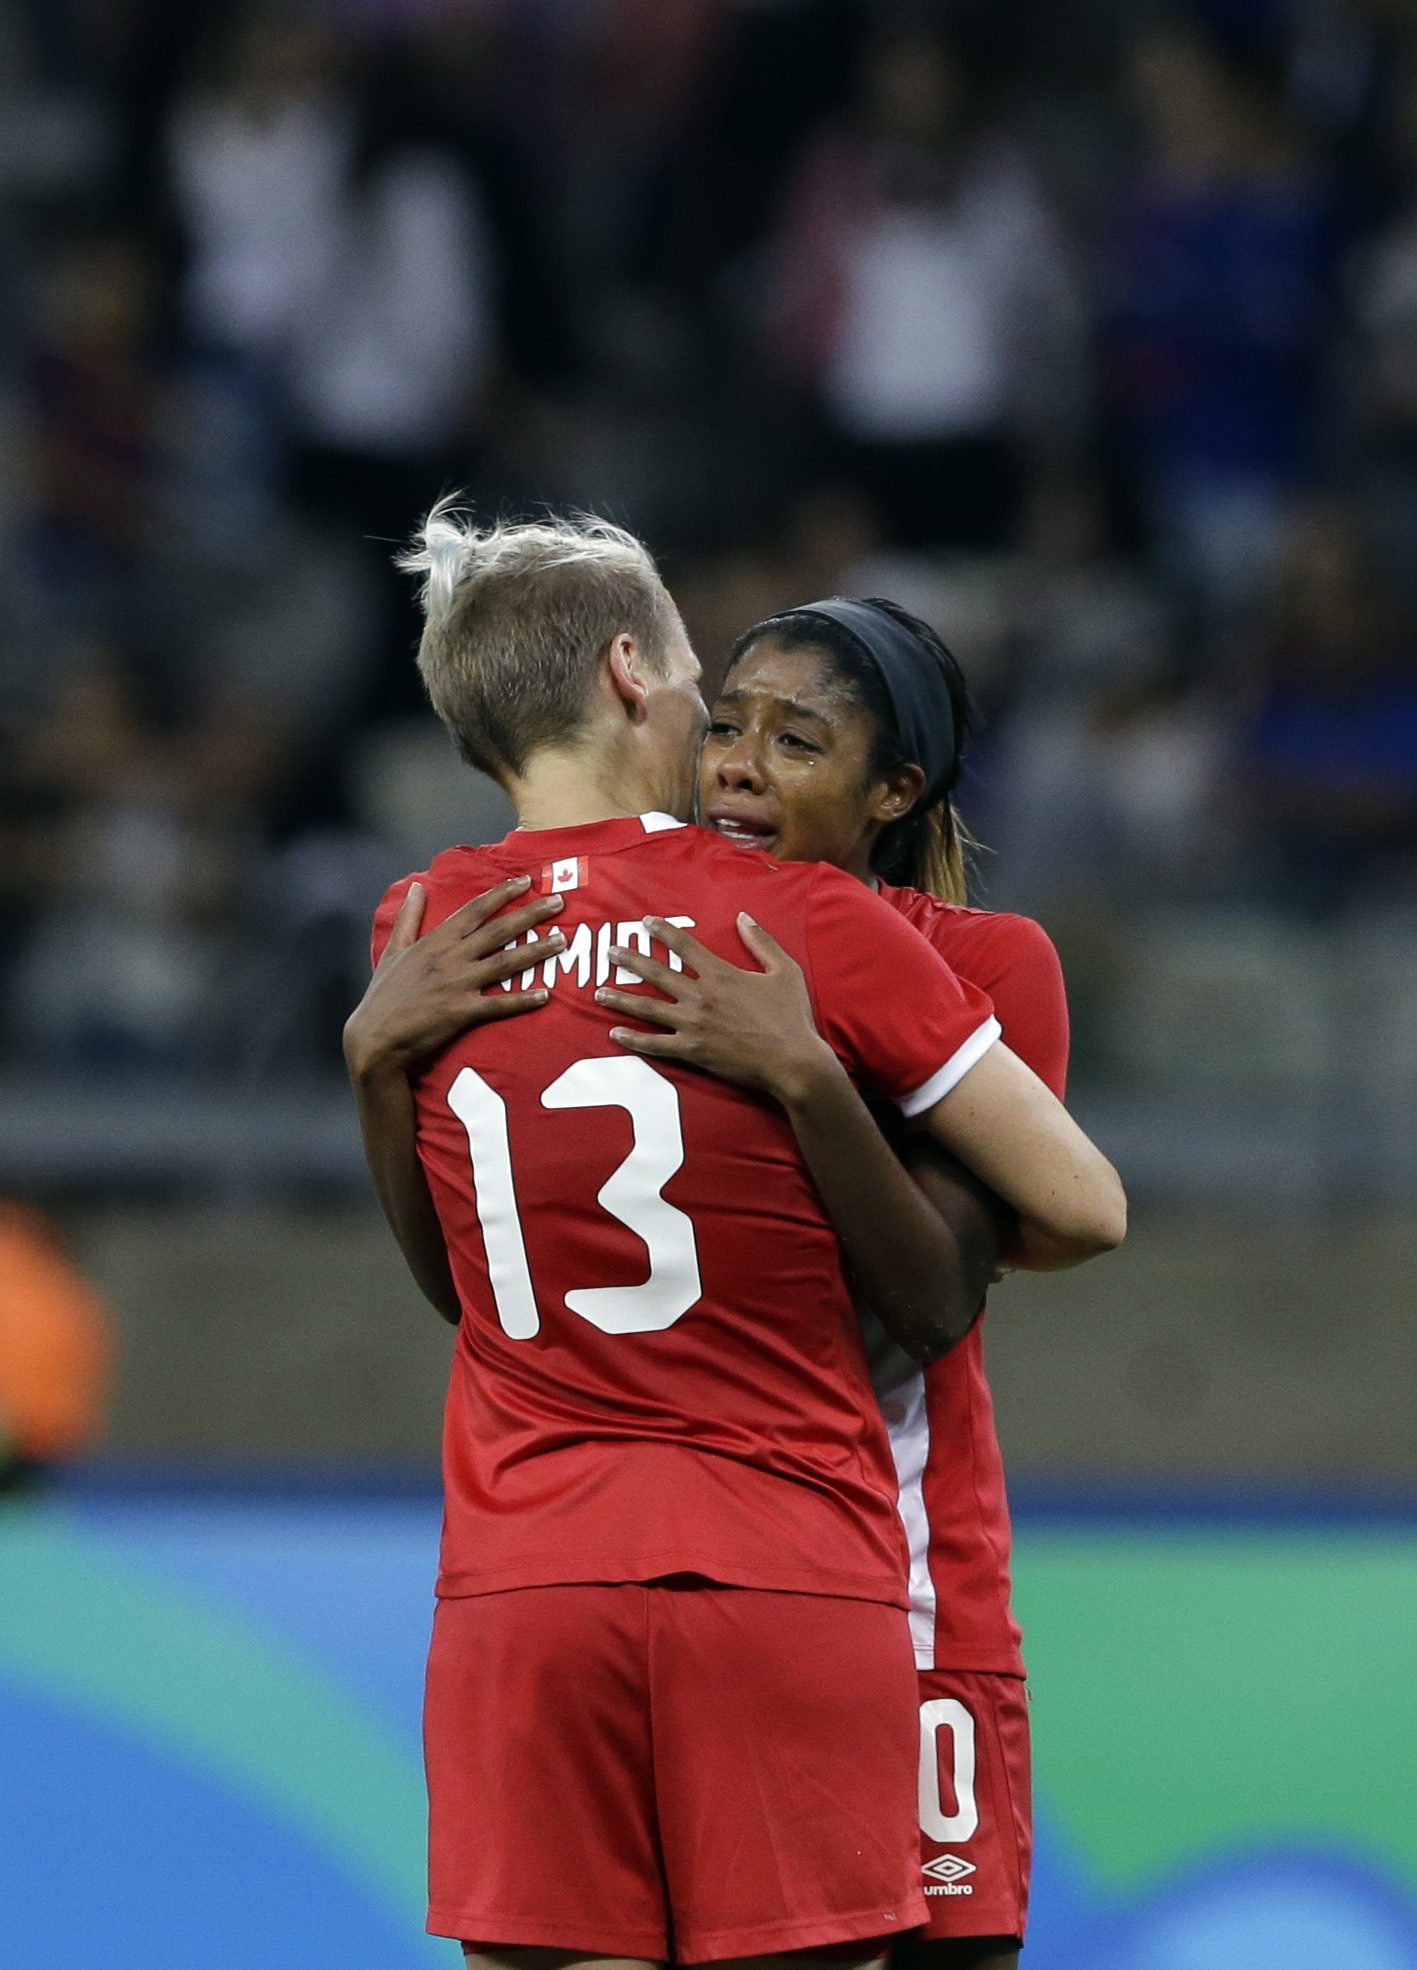 Canada's Sophie Schmidt, 13, and Ashley Lawrence comfort each other after a semifinal of the women's Olympic football tournament between Germany and Canada at the Mineirao Stadium in Belo Horizonte, Brazil, Tuesday, Aug. 16, 2016. Germany beat Canada 2-0 to reach the final against Sweden.(AP Photo/Leo Correa)